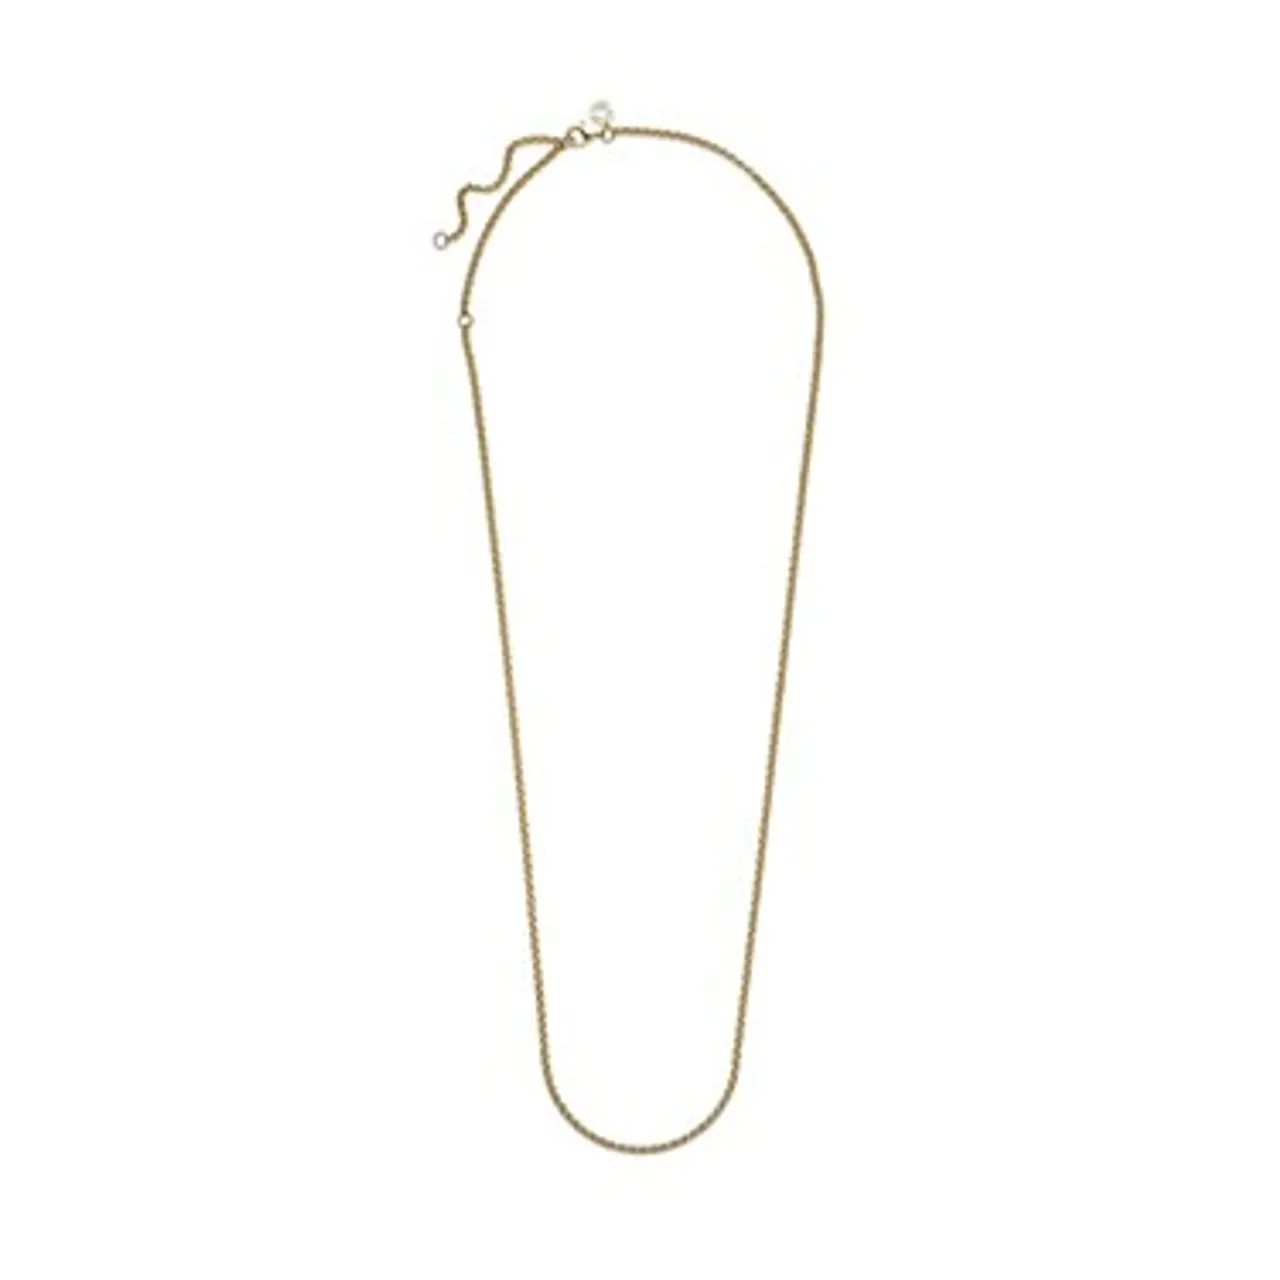 Pandora 14k Gold-Plated Rolo Chain Necklace - 60cm